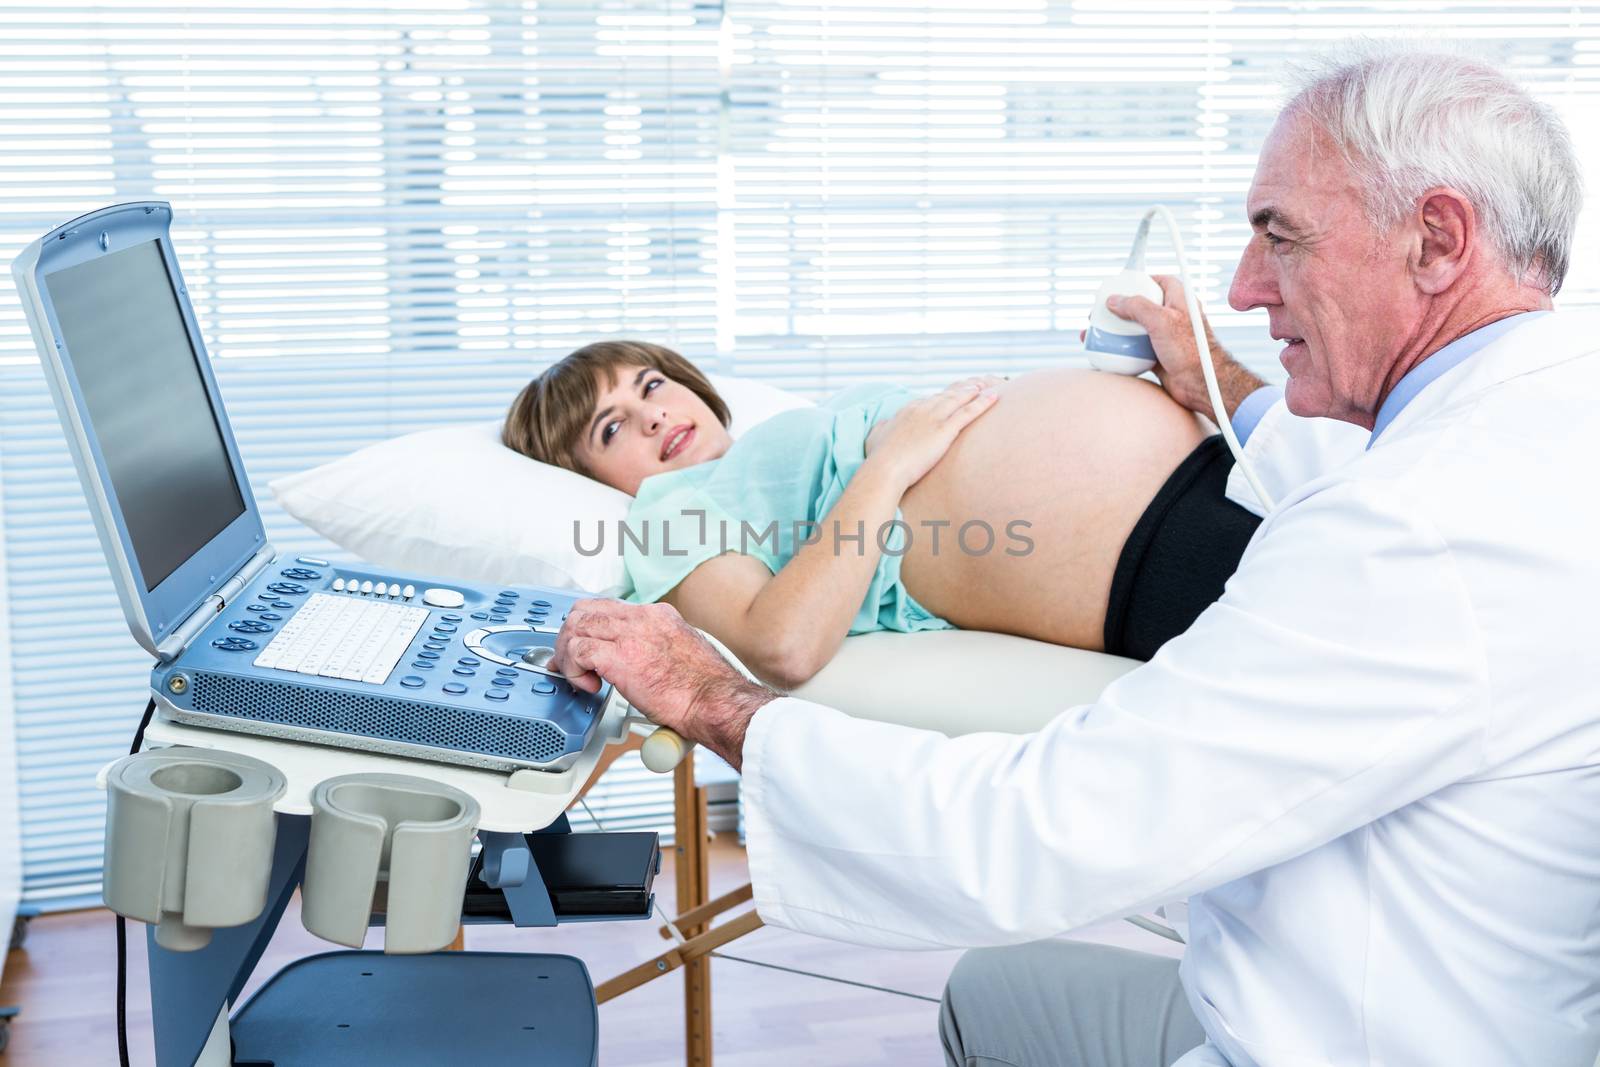 Pregnant woman and doctor looking at scan machine by Wavebreakmedia